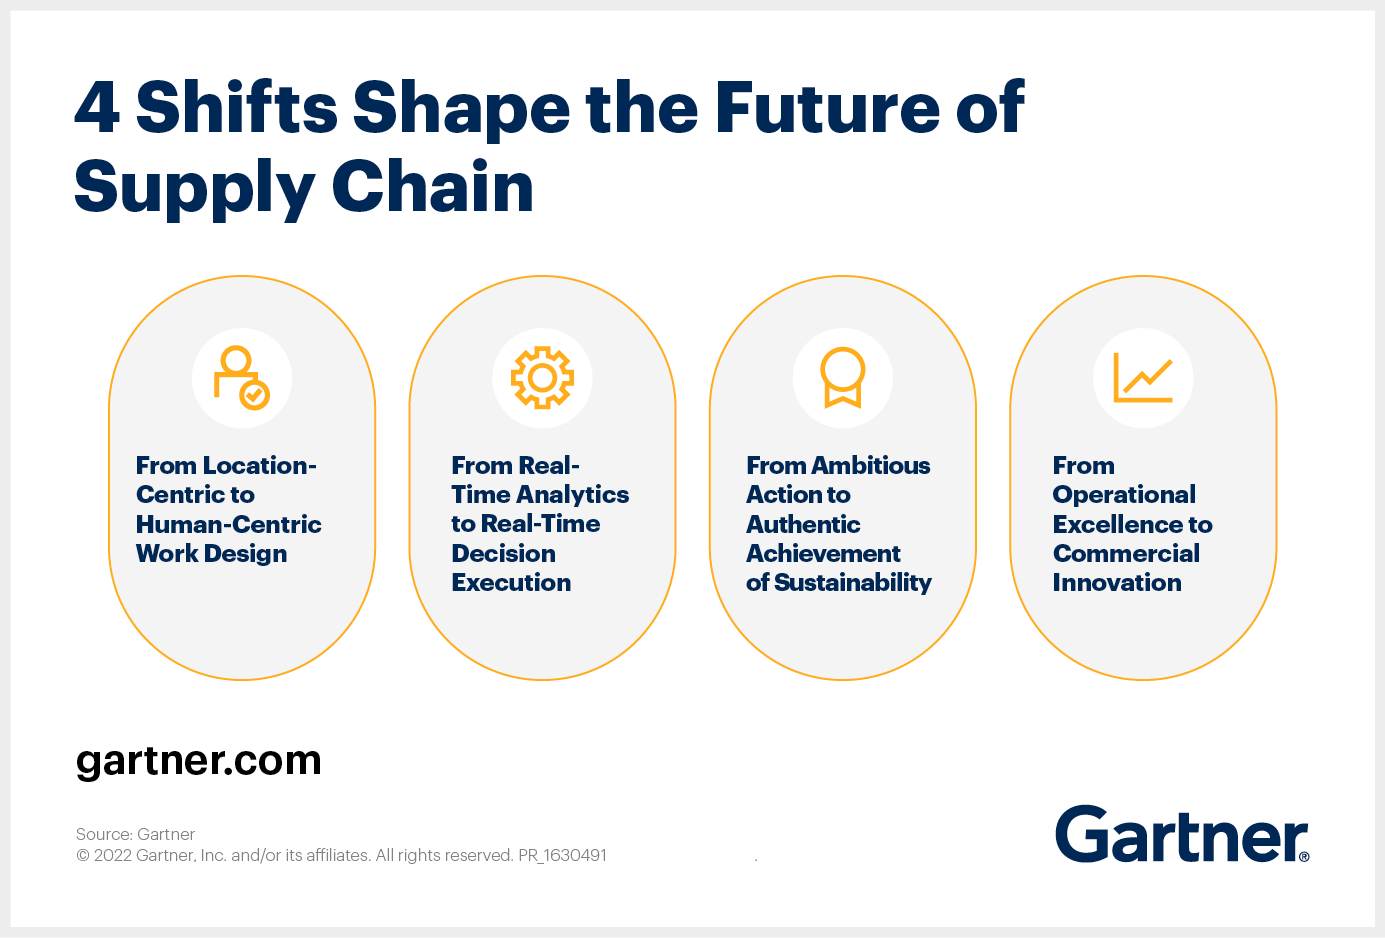 The Future of Supply Chain Shifts